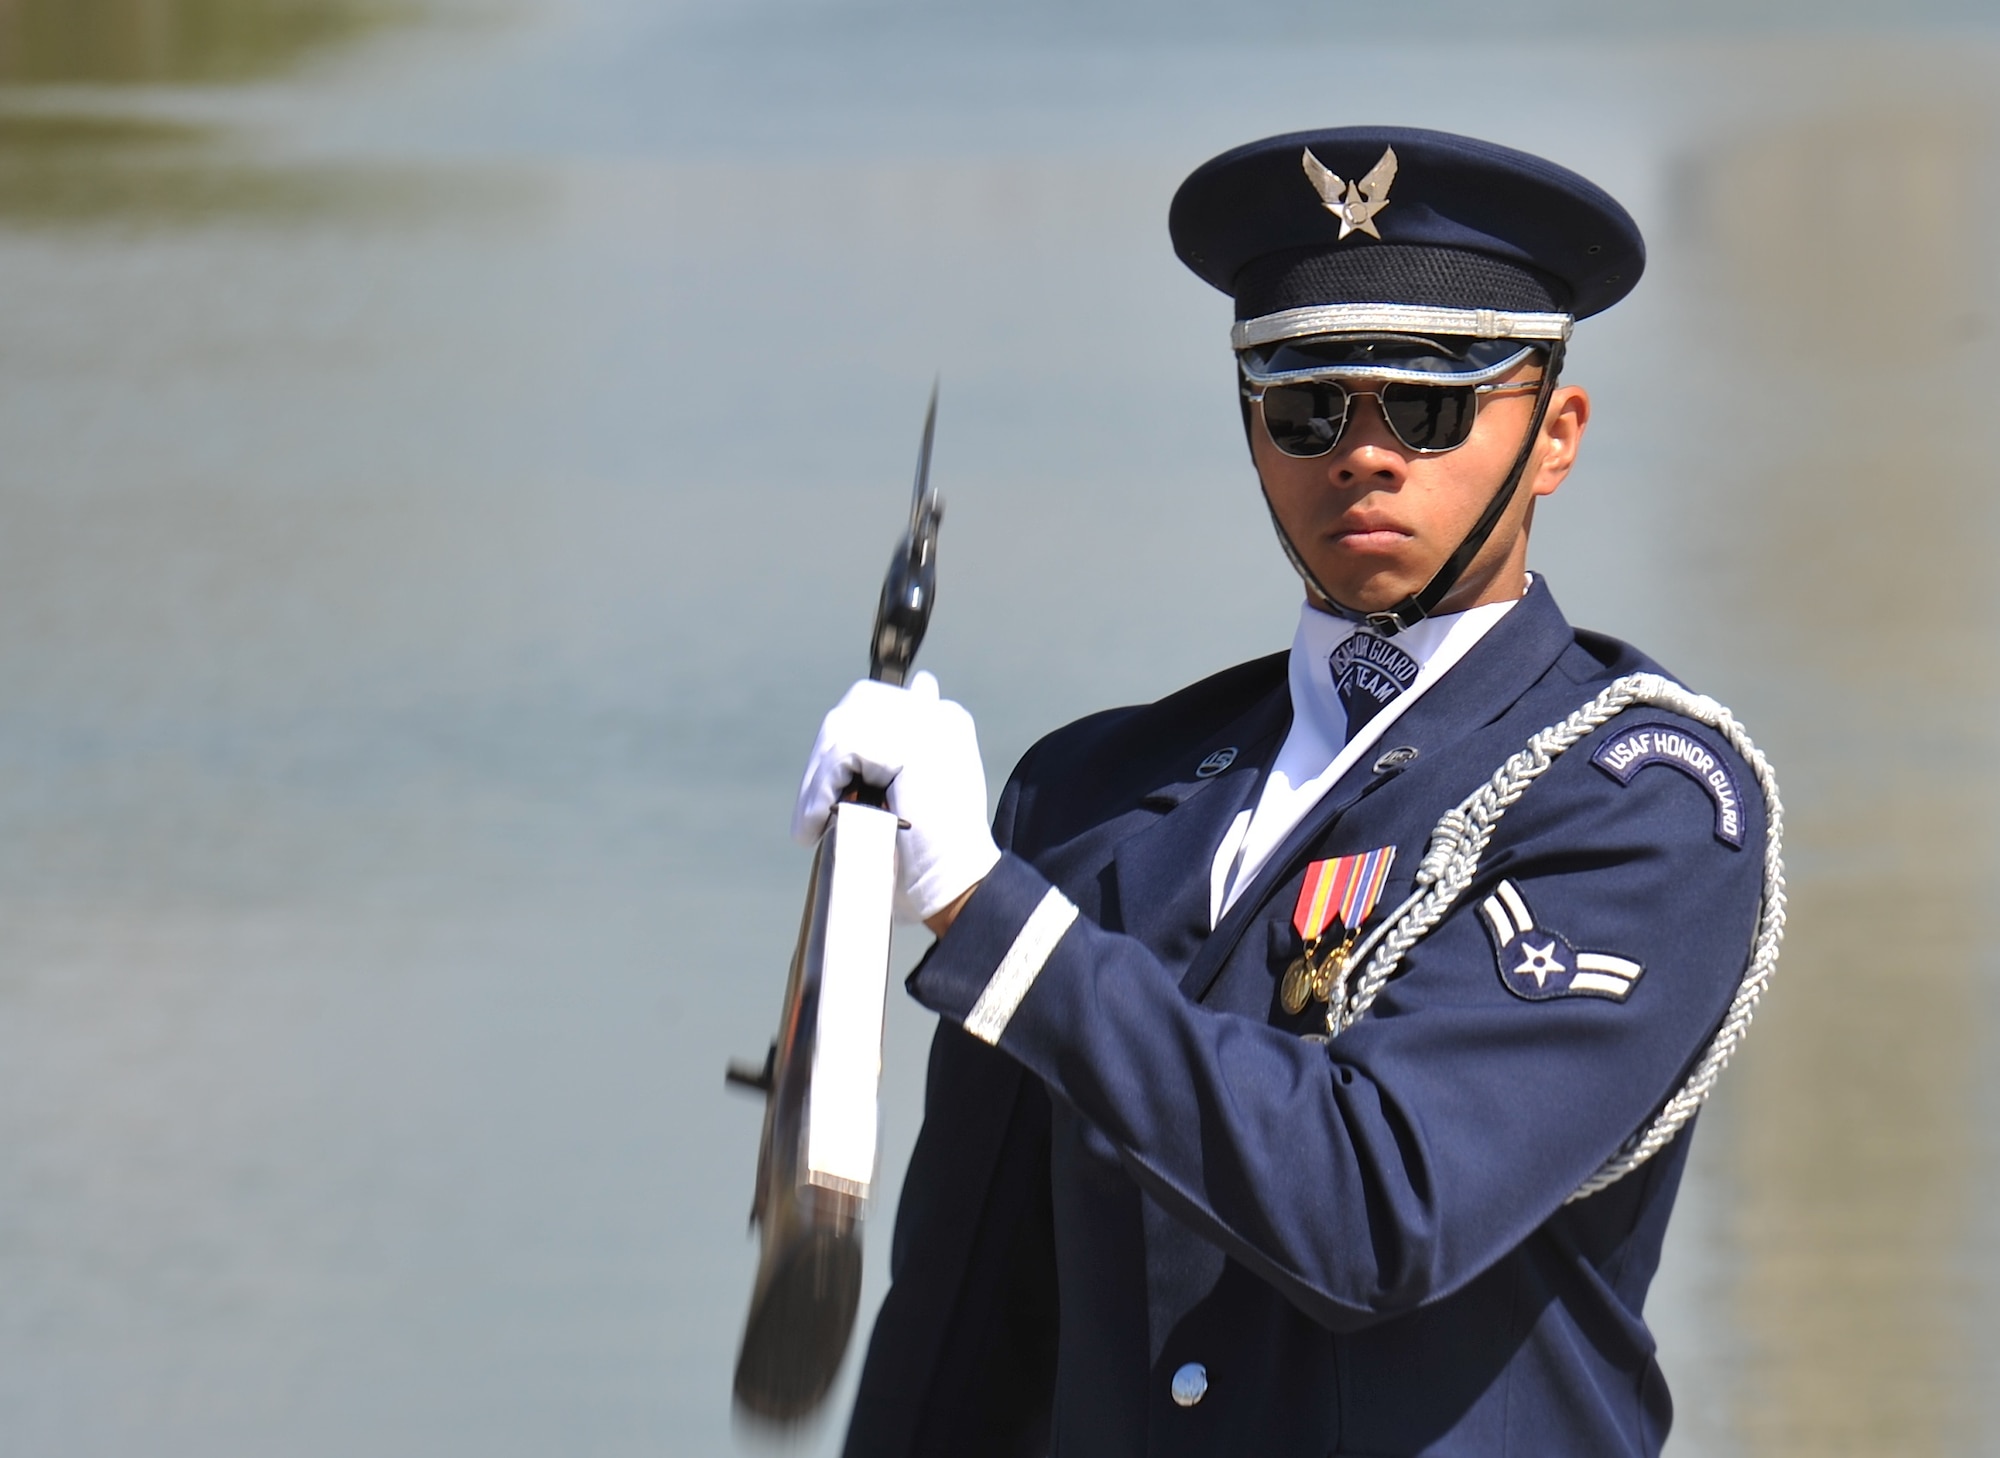 A member of the U.S. Air Force Honor Guard Drill Team perfoms a rifle drill with his M-1 Garand April 13, 2013,  at the National Cherry Blossom Festival in Washington, D.C. The Drill Team promotes the Air Force mission by showcasing highly perfected drill performances at public and military venues to recruit, retain, and inspire fellow Airmen. (U.S. Air Force photo/Airman 1st Class Alexander W. Riedel)